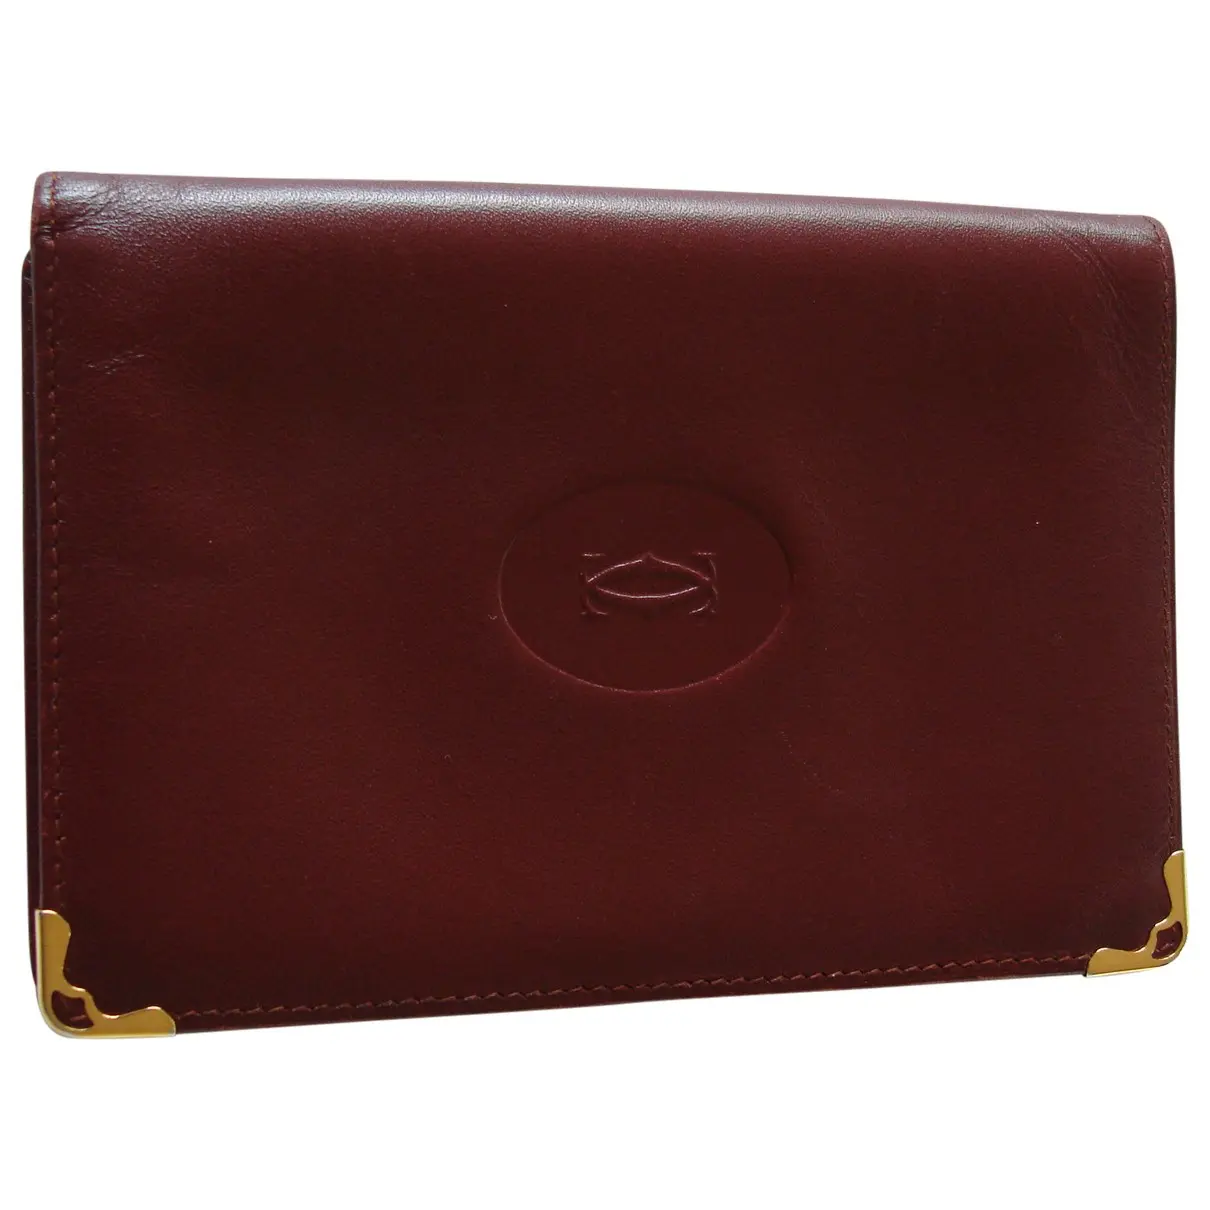 Burgundy Leather Small bag Cartier